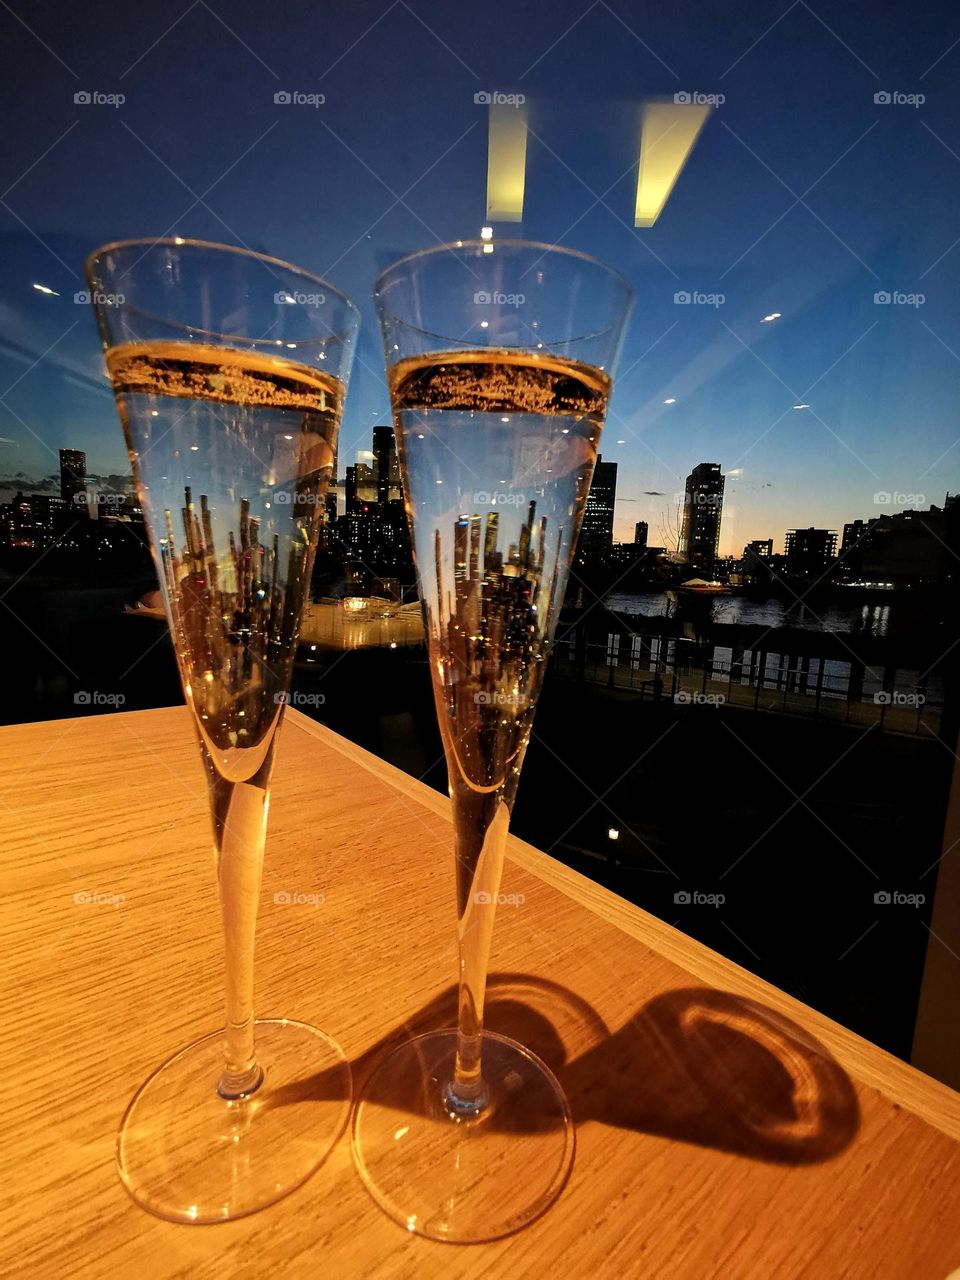 Beautiful reflection of skyscrapers in champagne glasses. I like to see the extraordinary in ordinary things. Night photo, city views. 😍